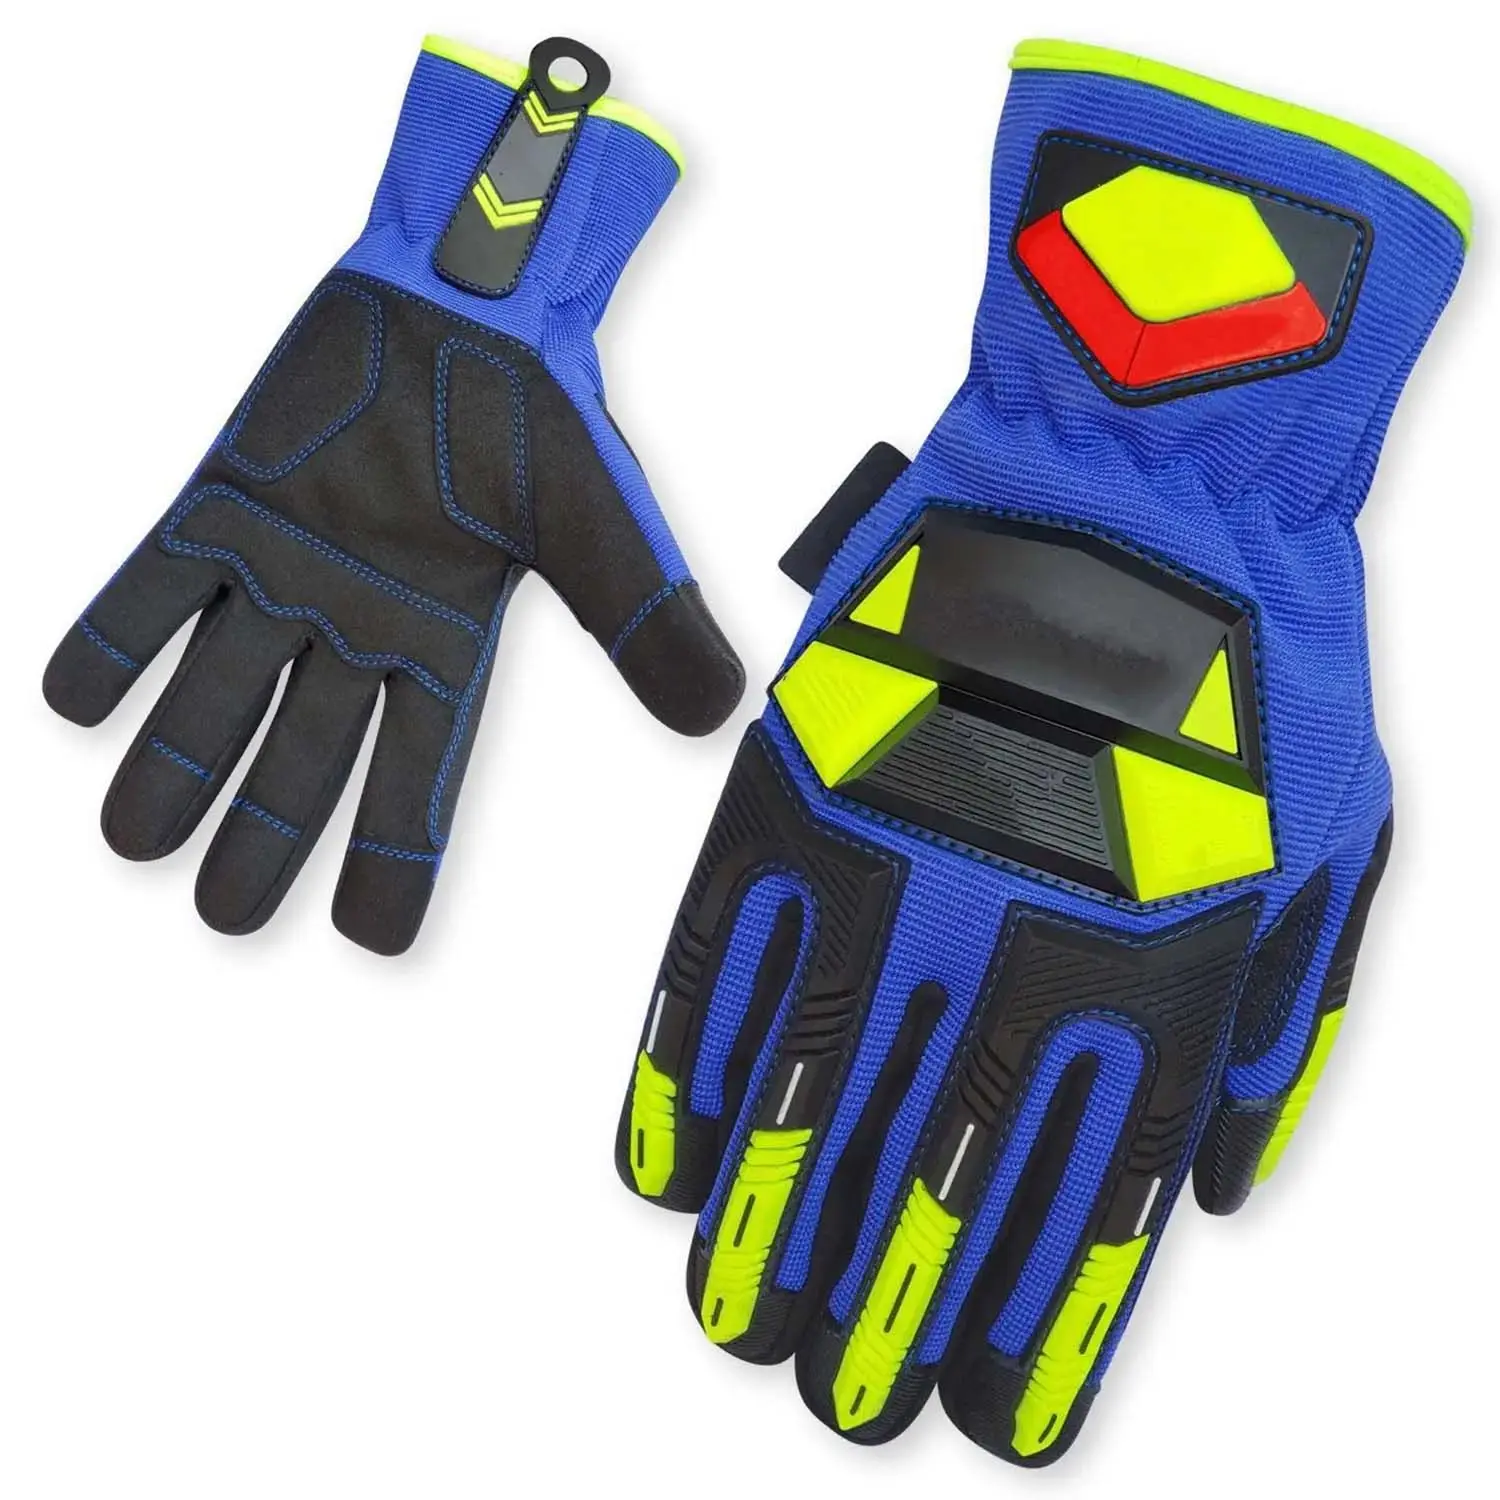 High Performance Cut Resistant Safety Gloves Oil & Gas Industrial Safety Mechanic Working Gloves